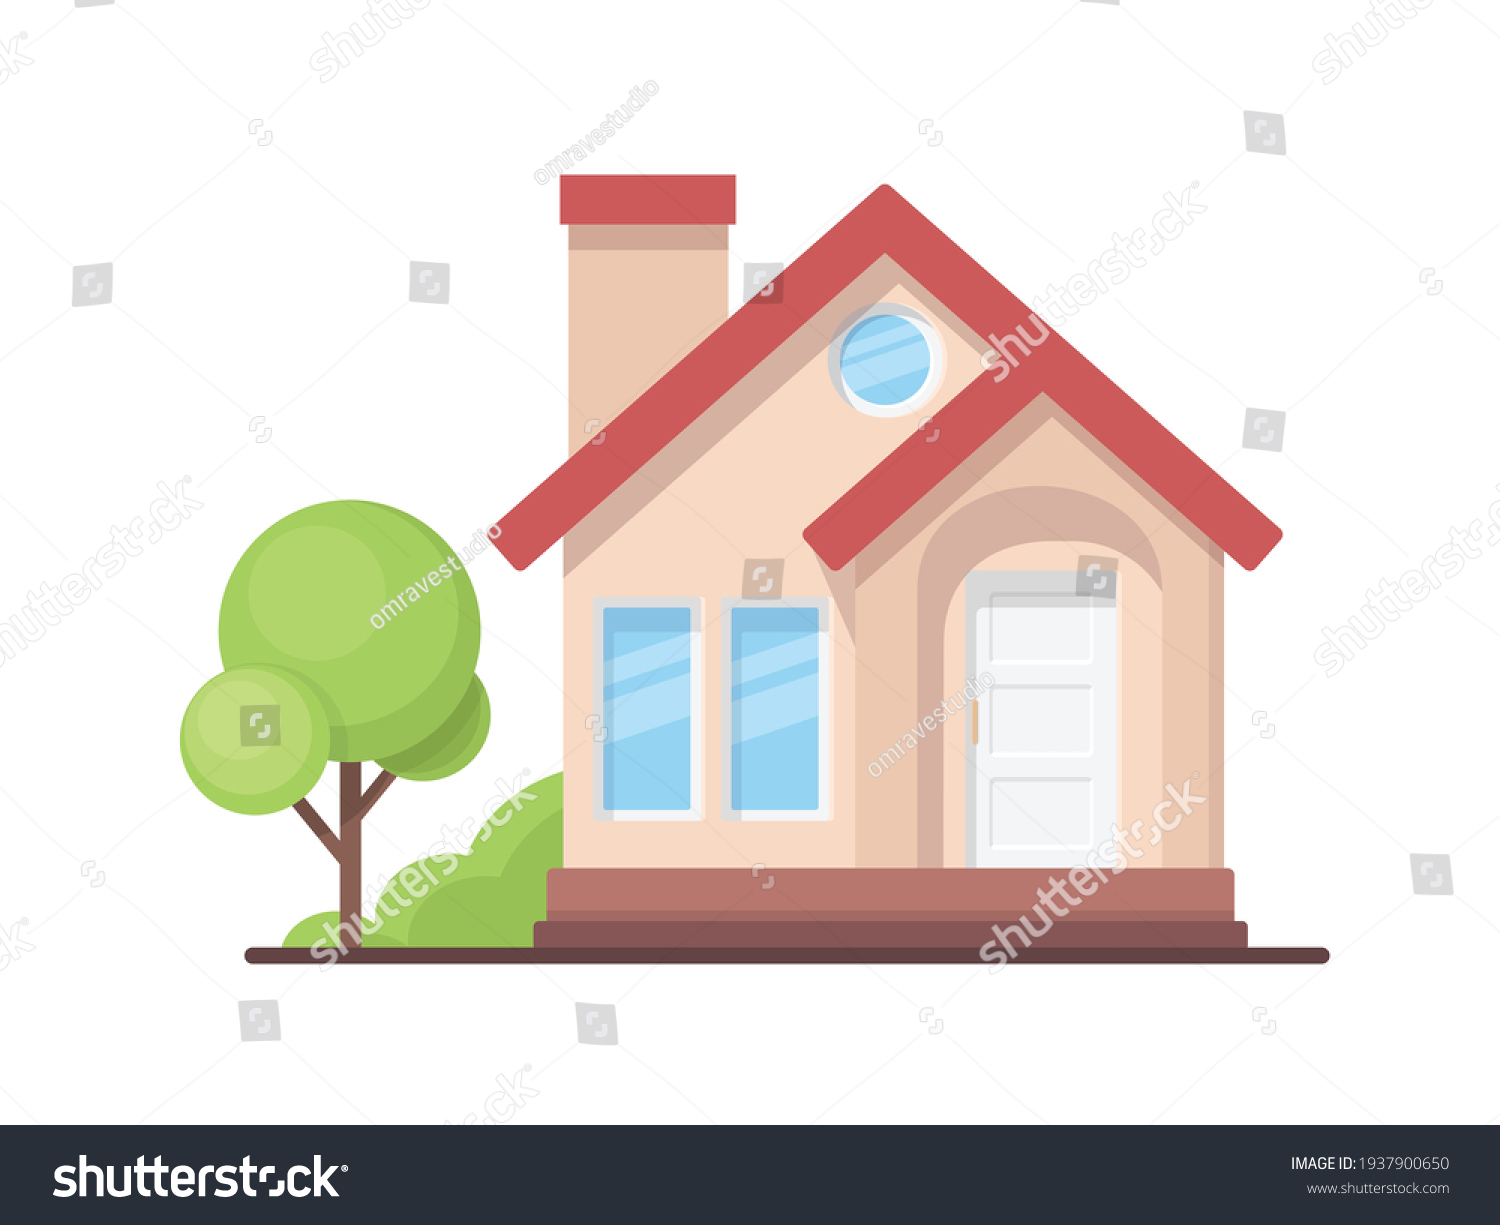 SVG of illustration of simple house isolated on white background svg